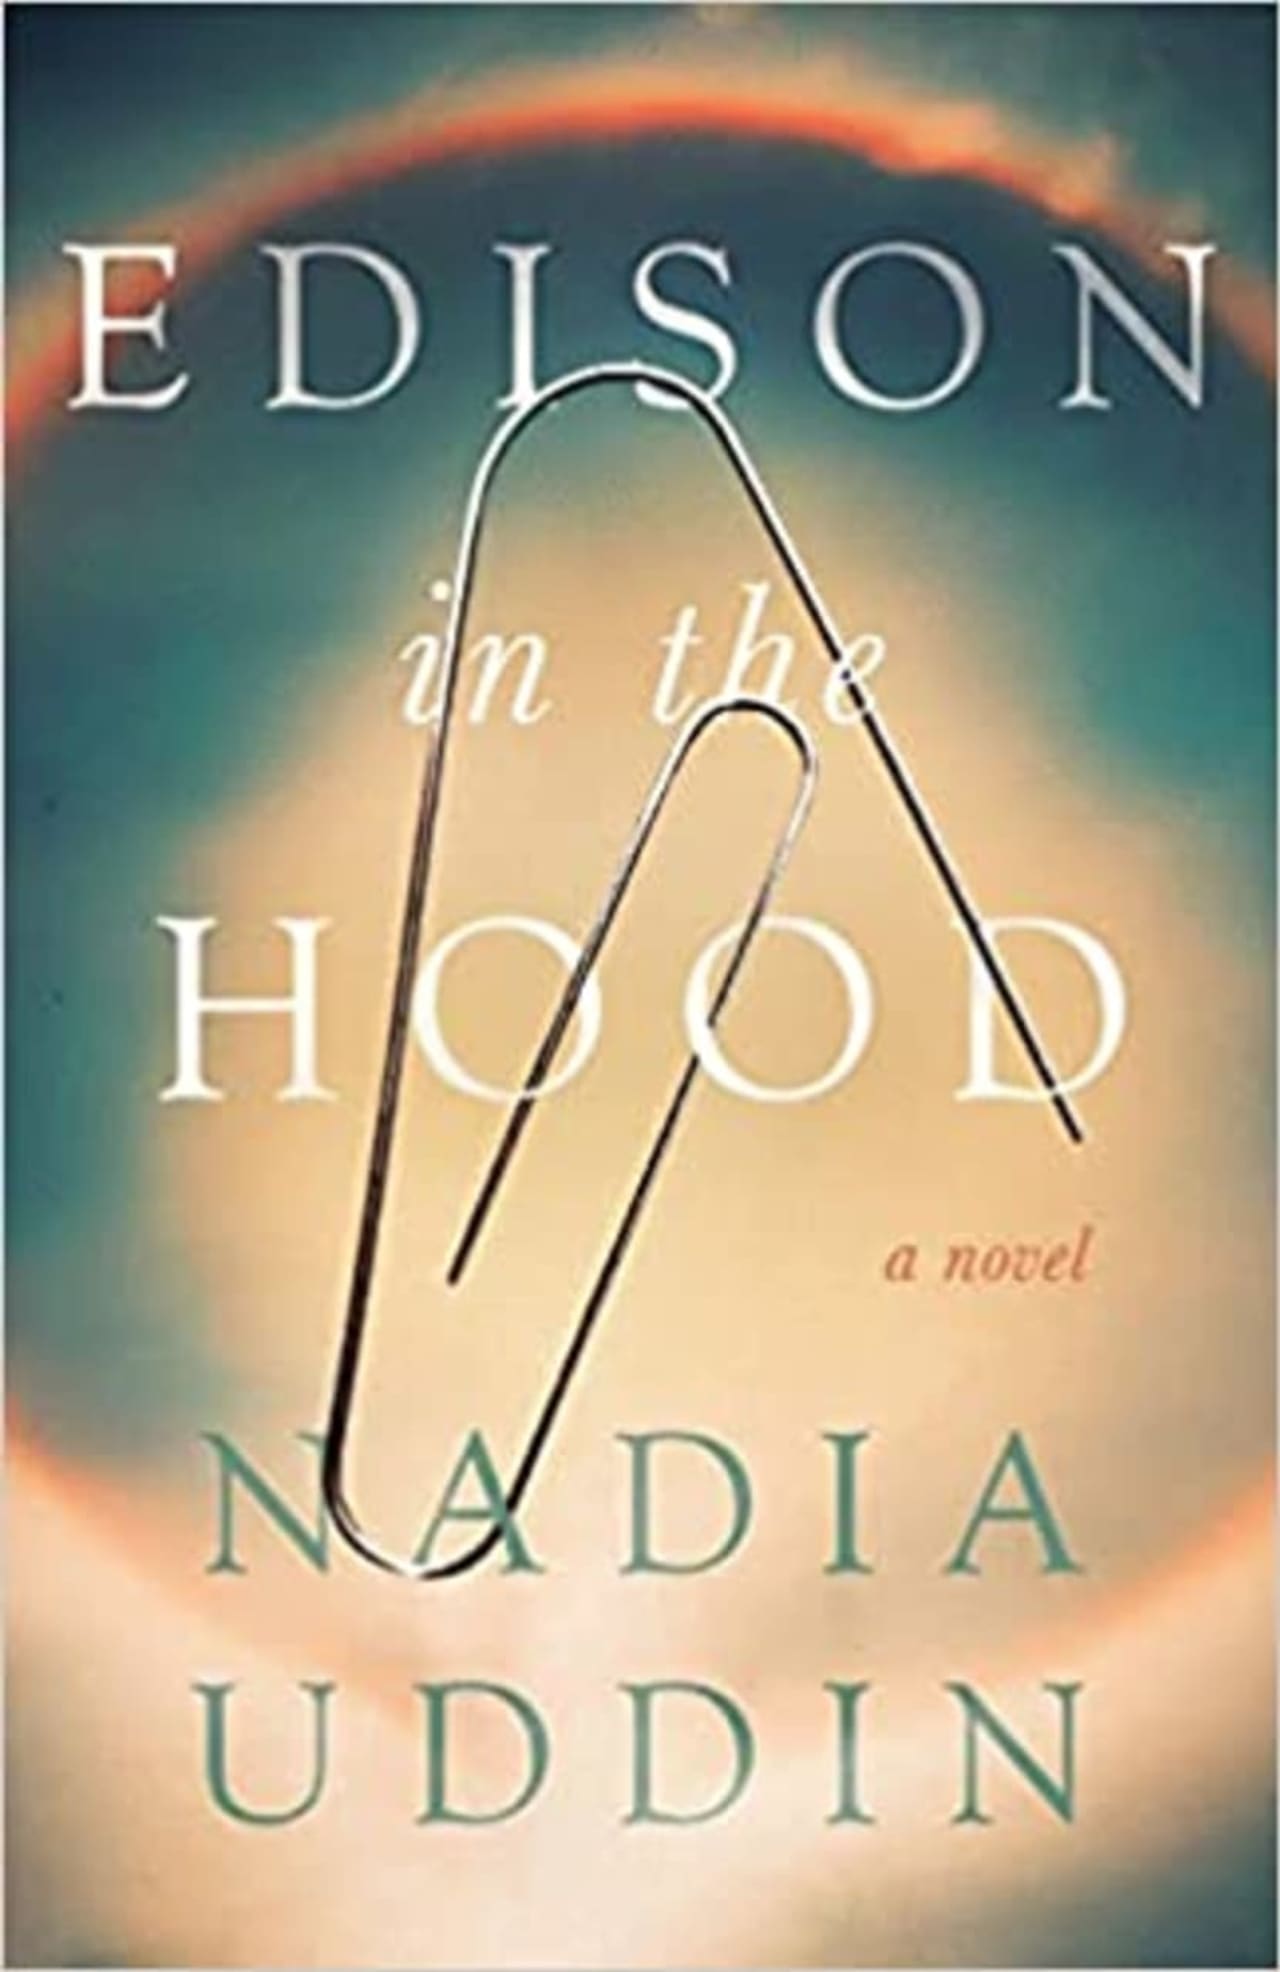 Edison in the Hood will be available online and in bookstores on October 11, 2022.